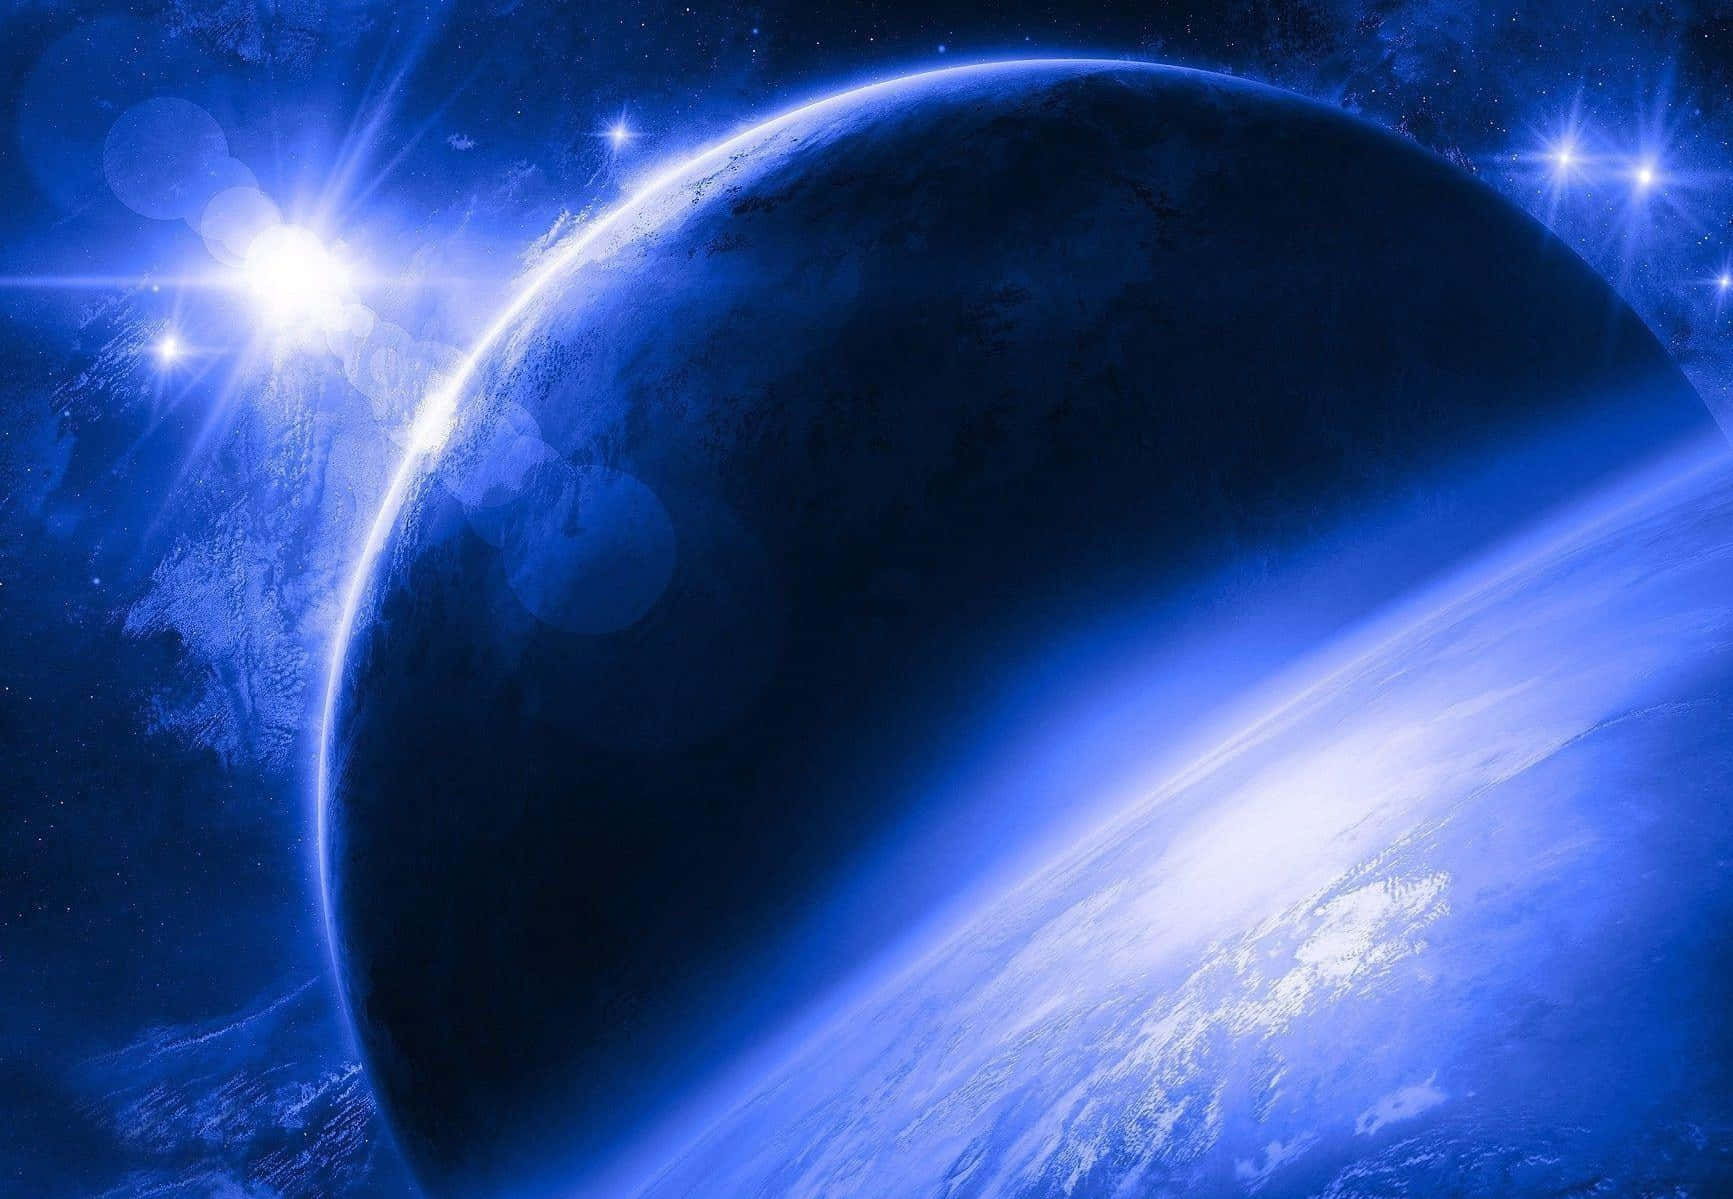 A shining blue planet, proof of our global interconnectedness Wallpaper